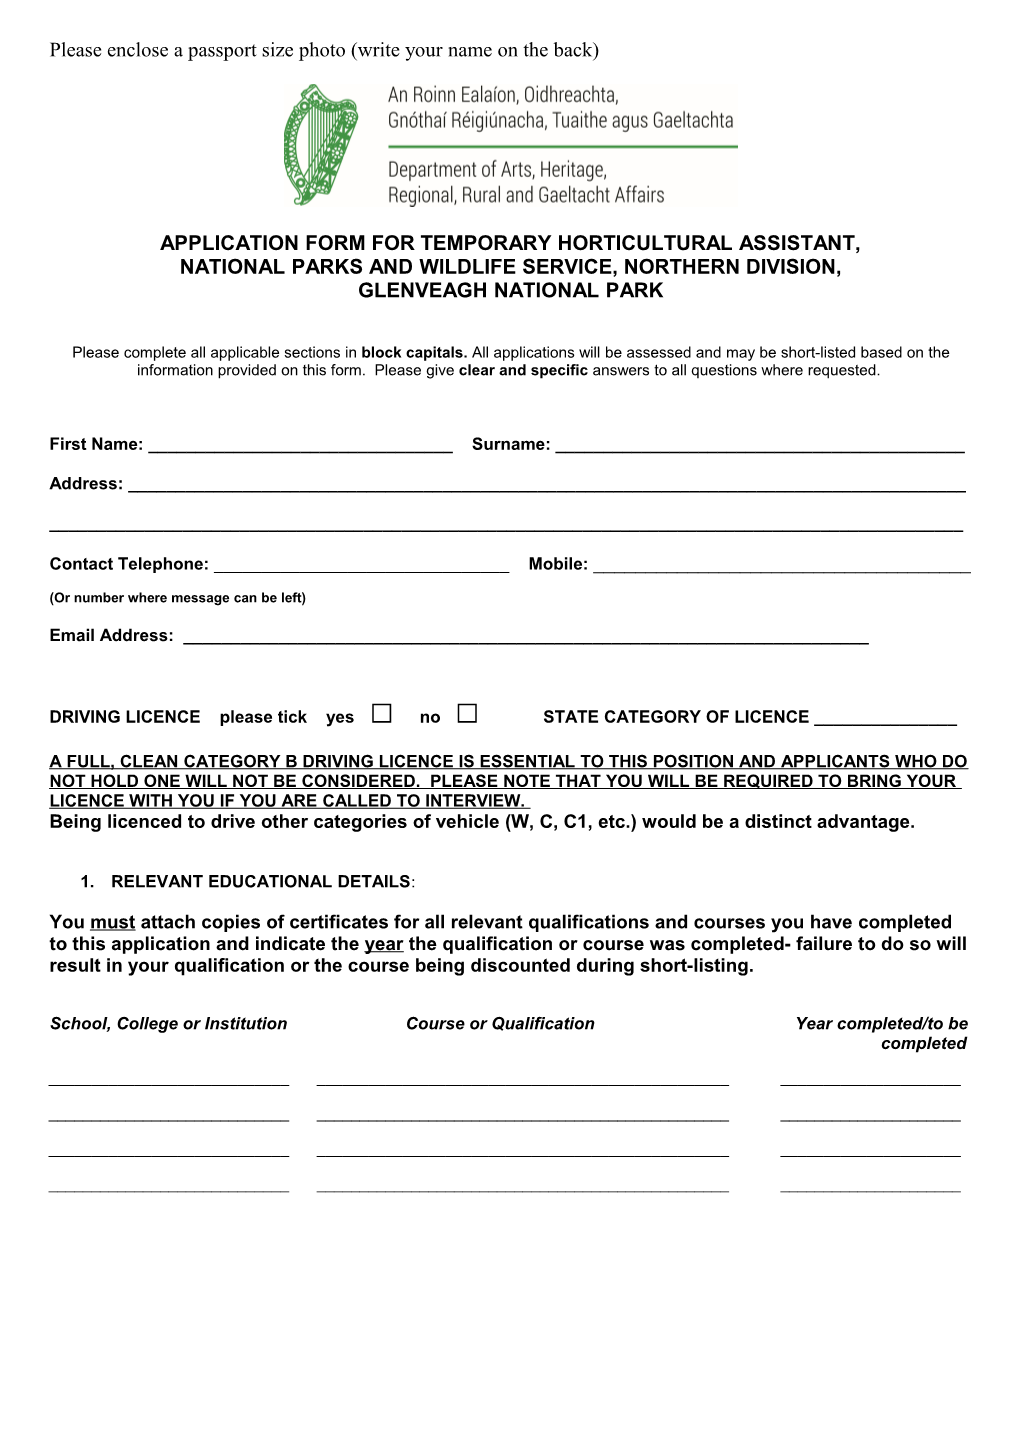 Application Form for Temporary Horticultural Assistant